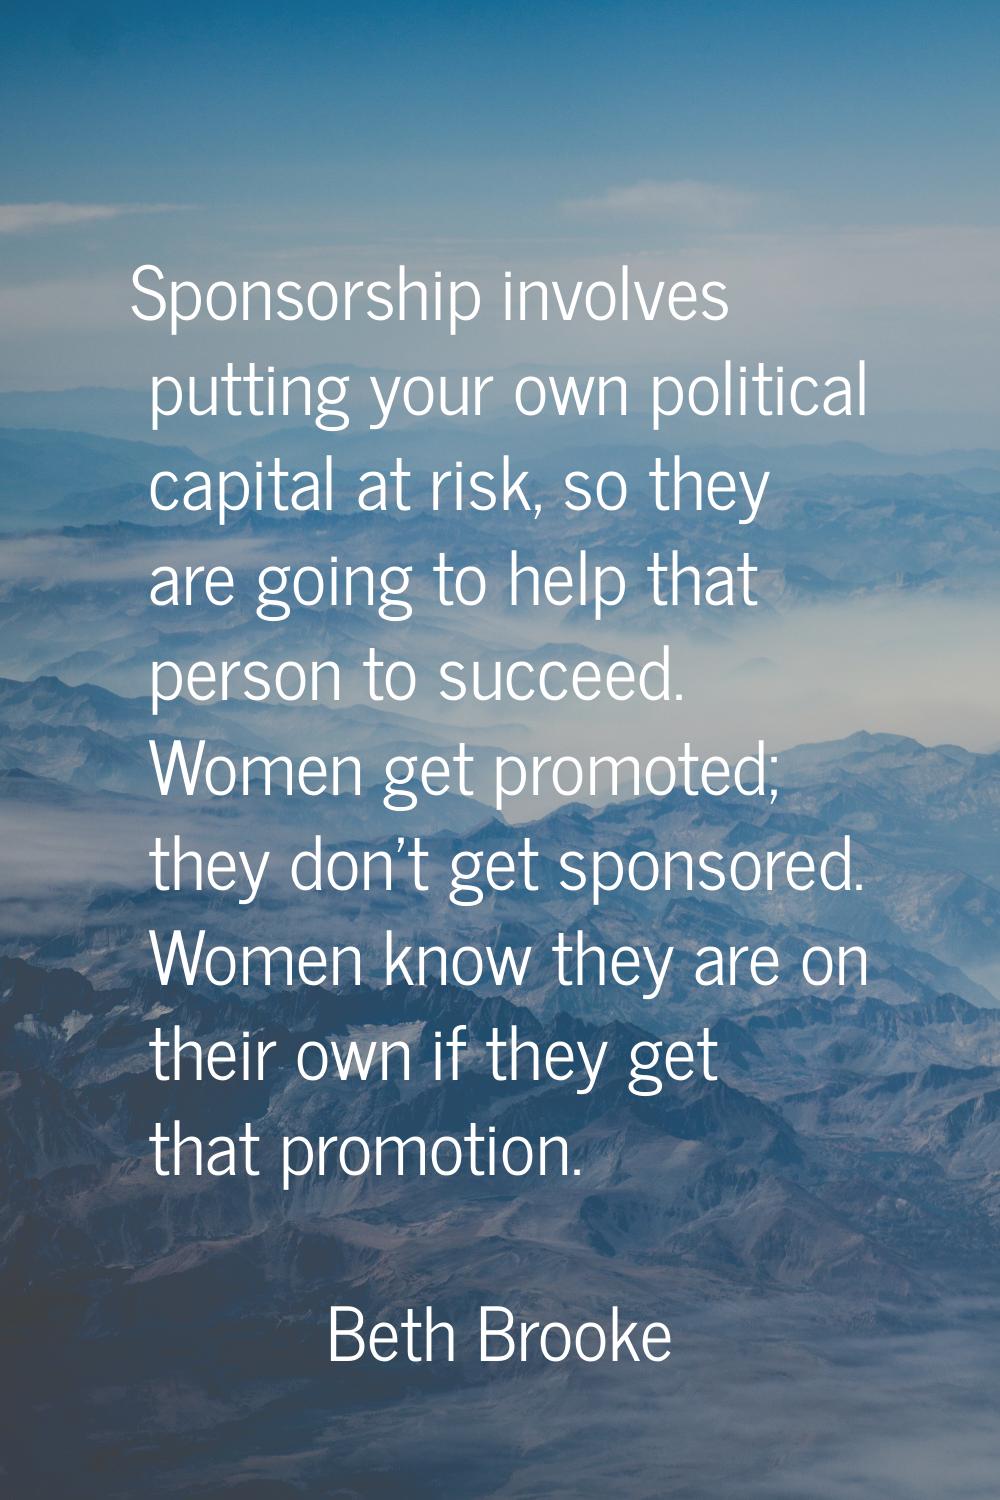 Sponsorship involves putting your own political capital at risk, so they are going to help that per